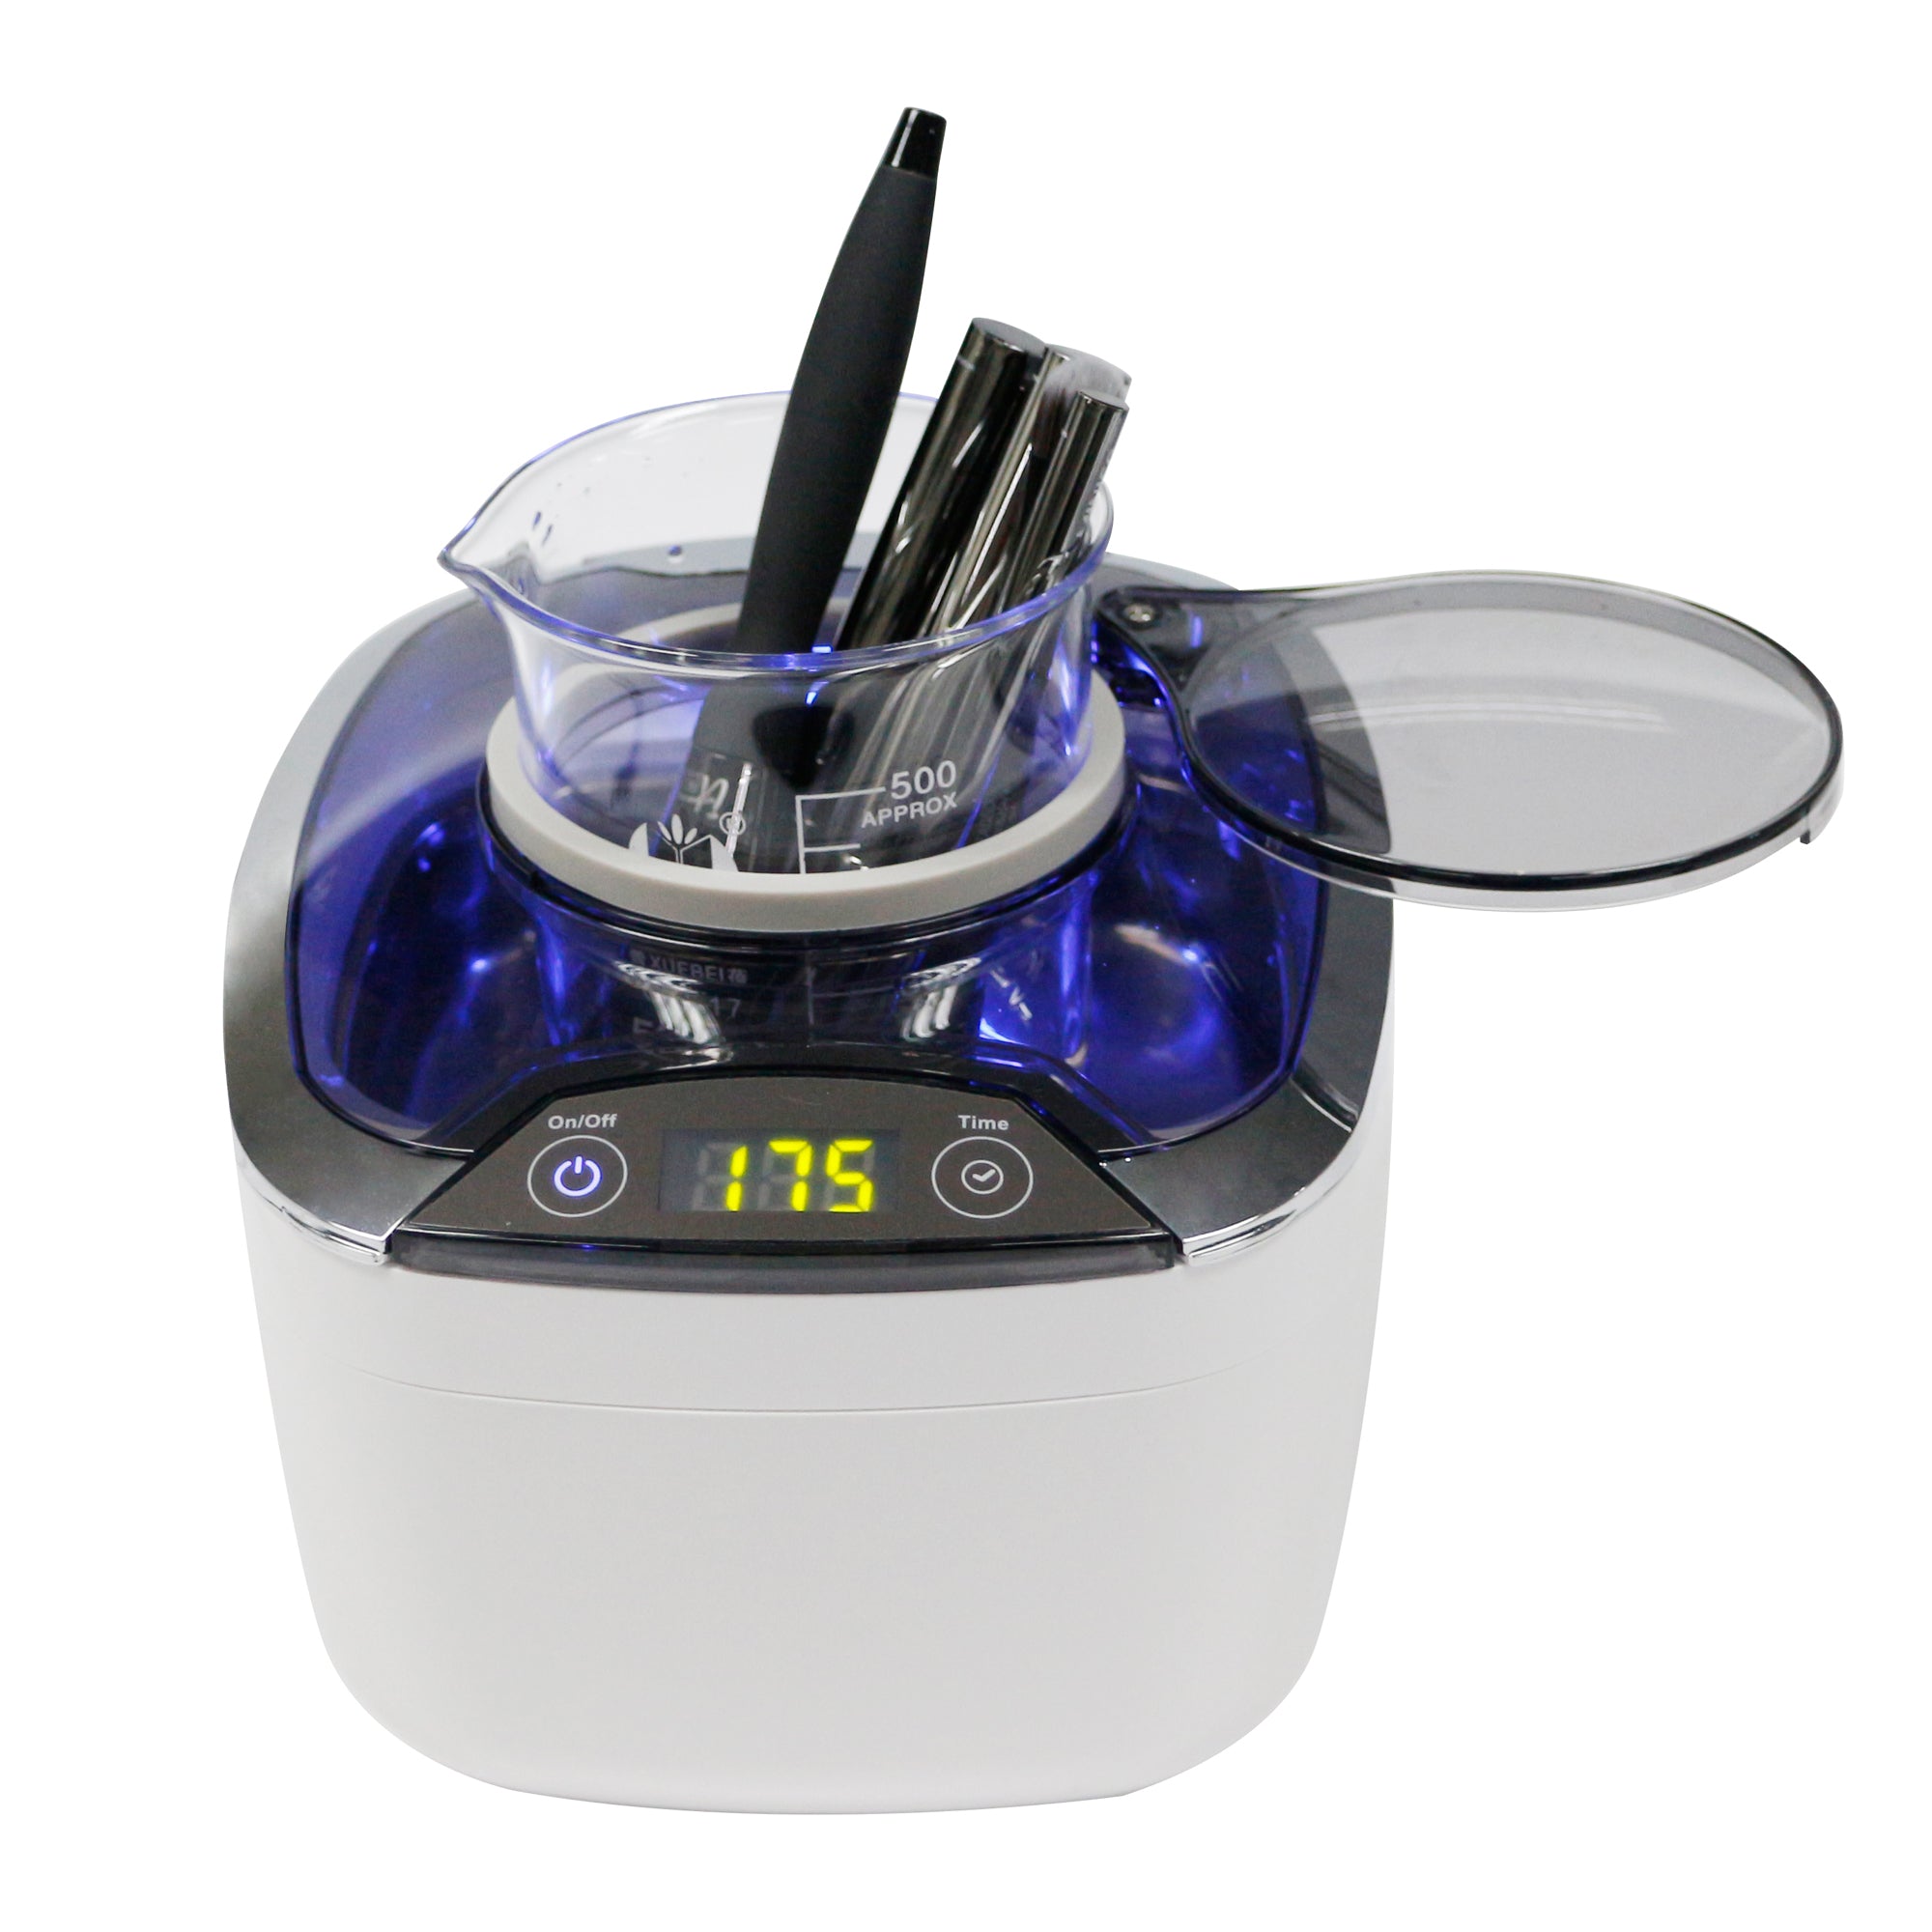 DS400B | iSonic? Miniaturized Commercial Ultrasonic Cleaner for Jewelry, Cosmetic Tools, Eyeglasses